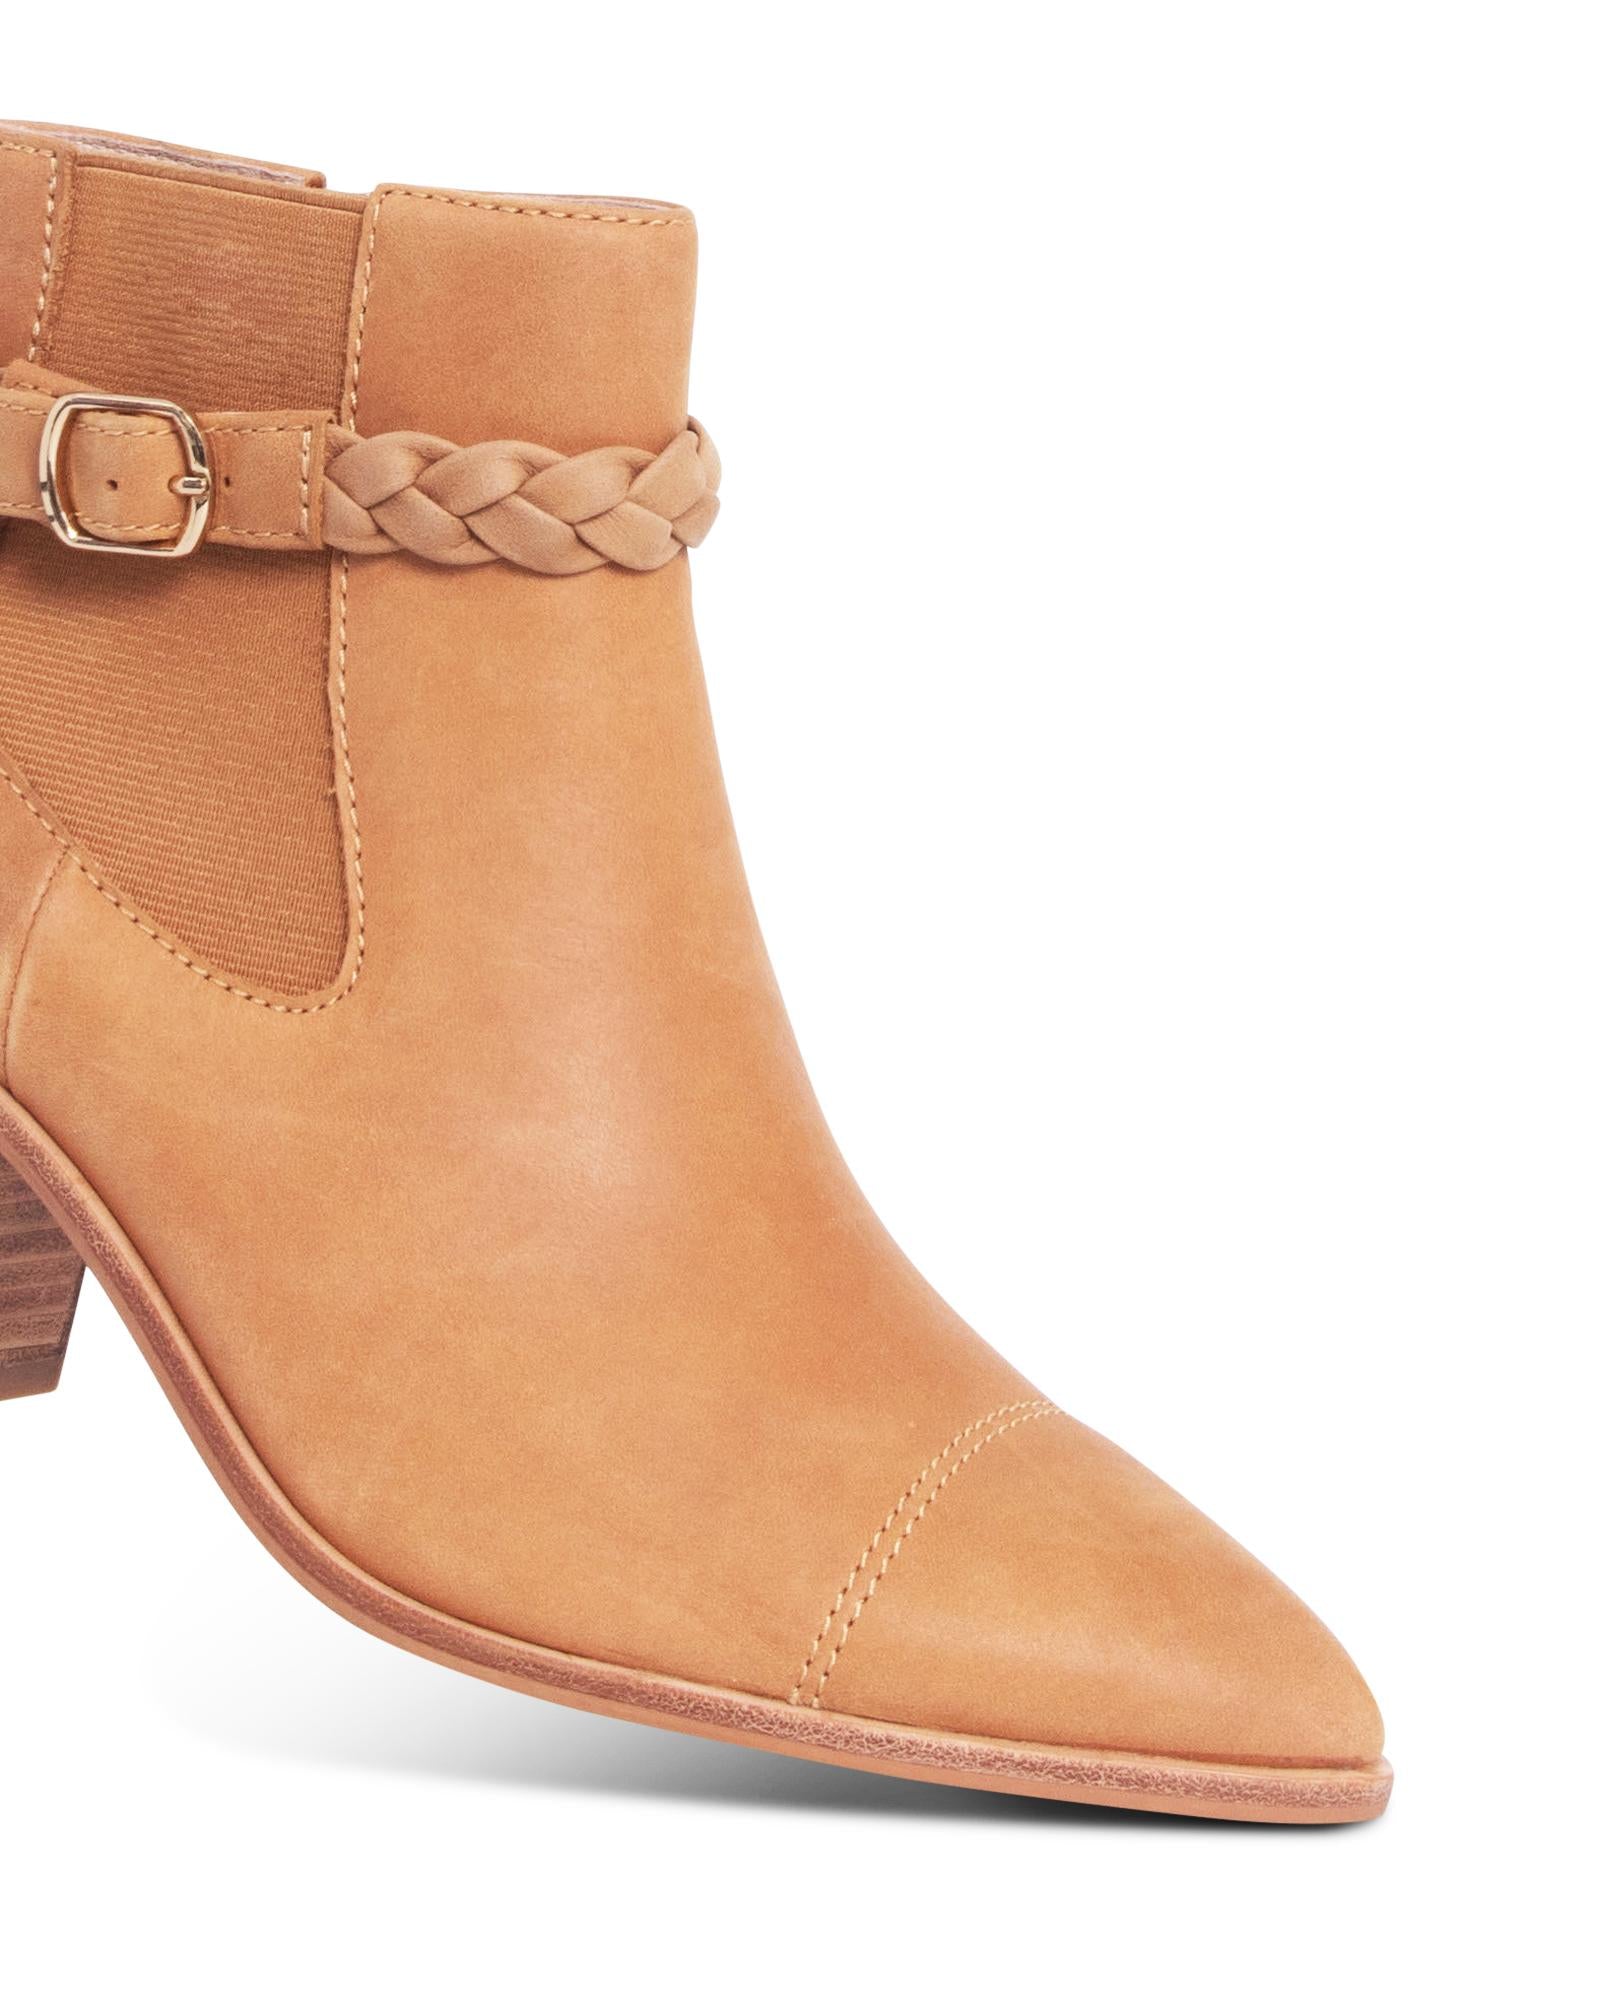 Margo Tan 7cm Ankle Boot